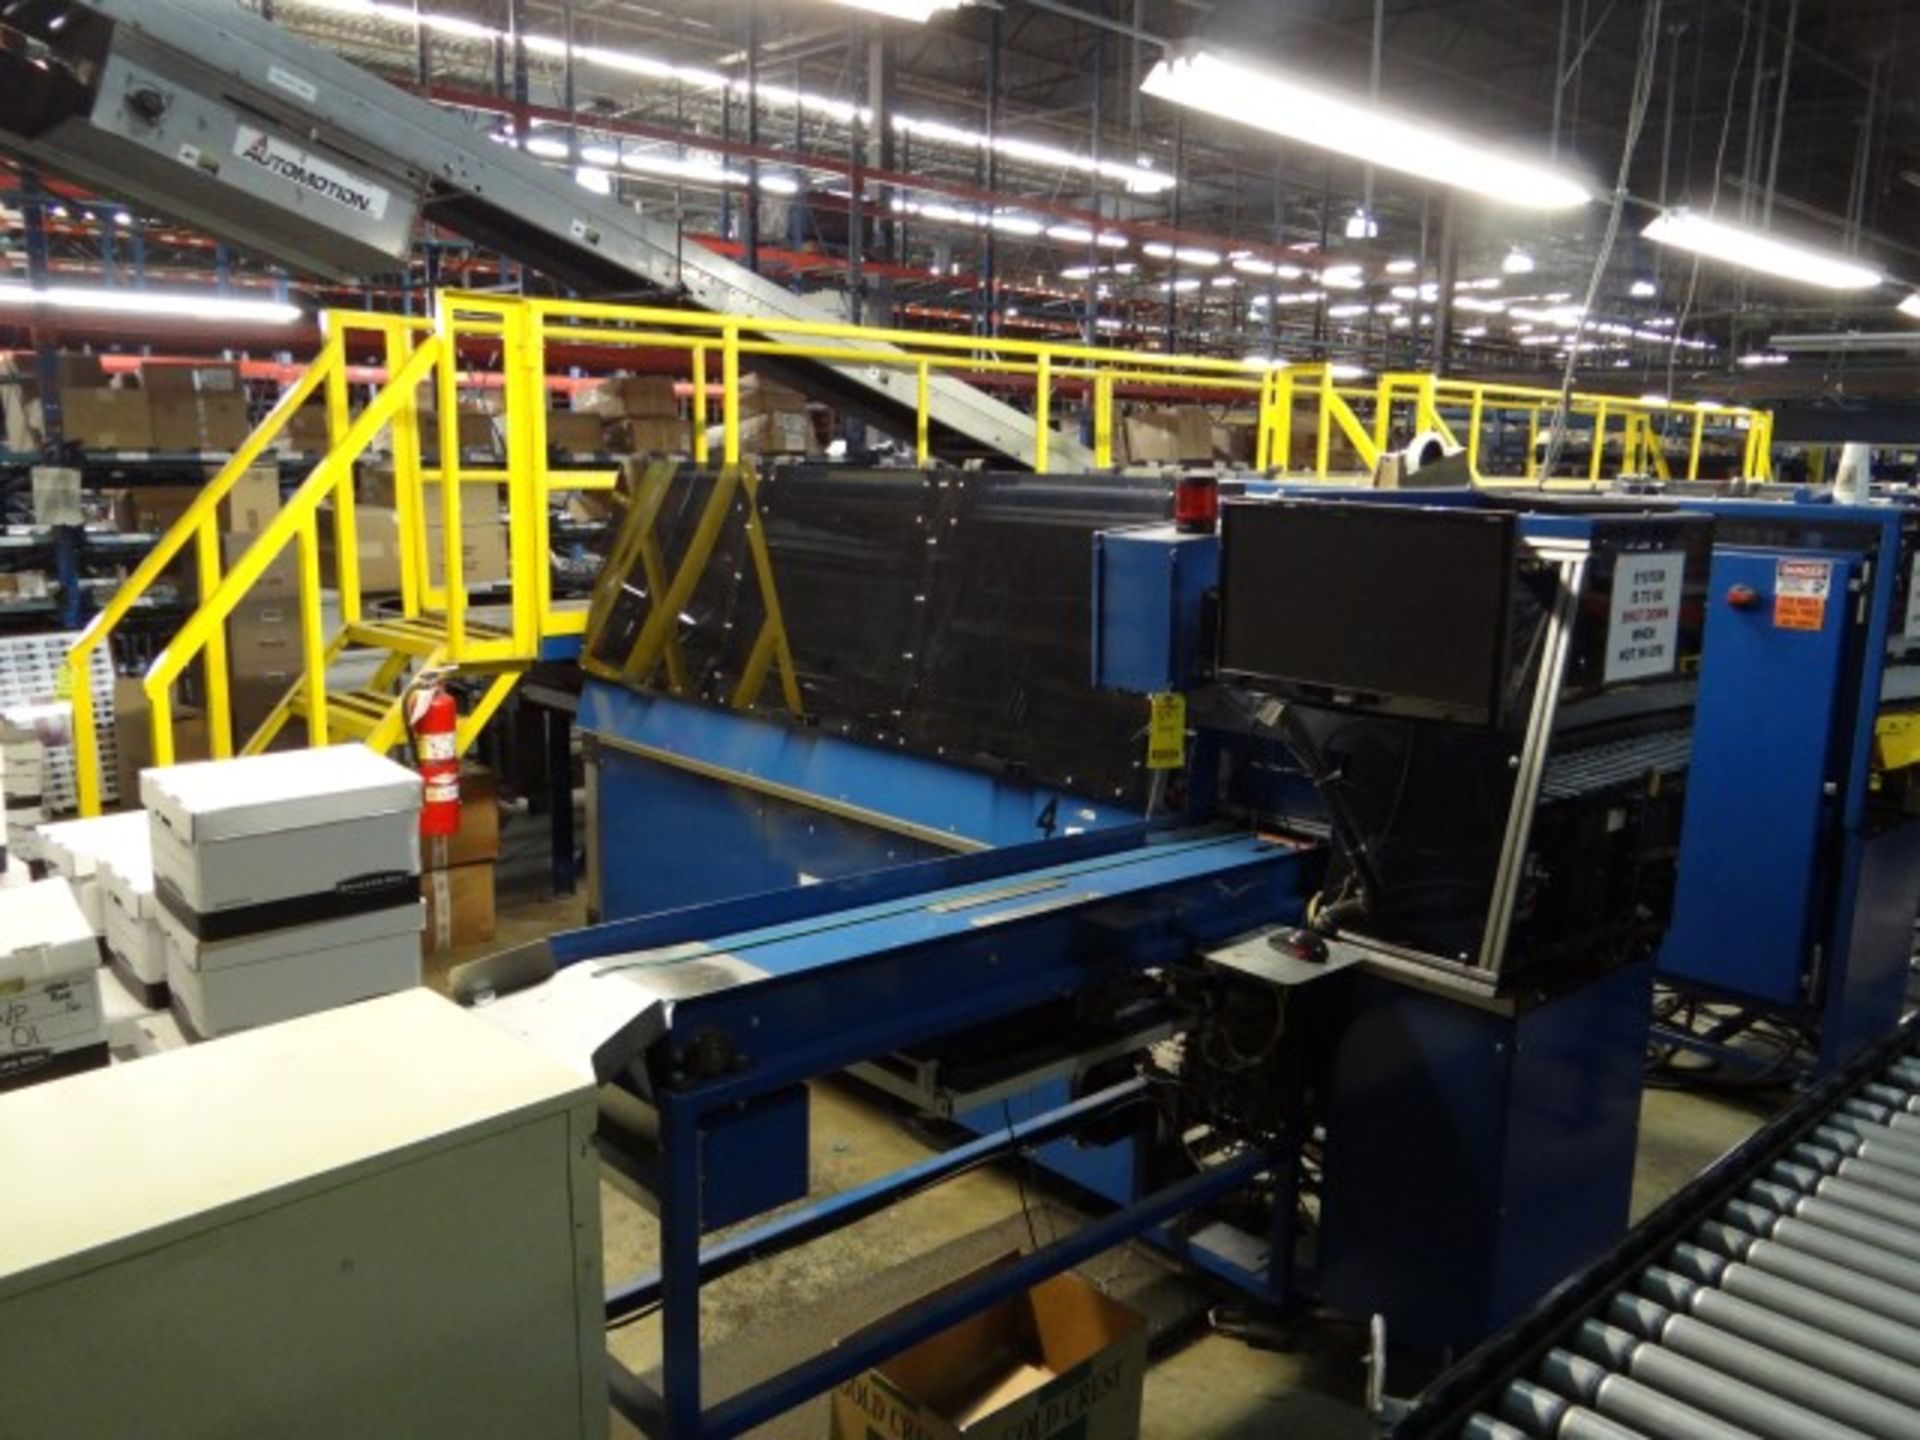 Tech King Cigarette Pick to Light System with 6 Pick Stations, Conveyors, Flow Racks, Box Tram and - Image 3 of 57